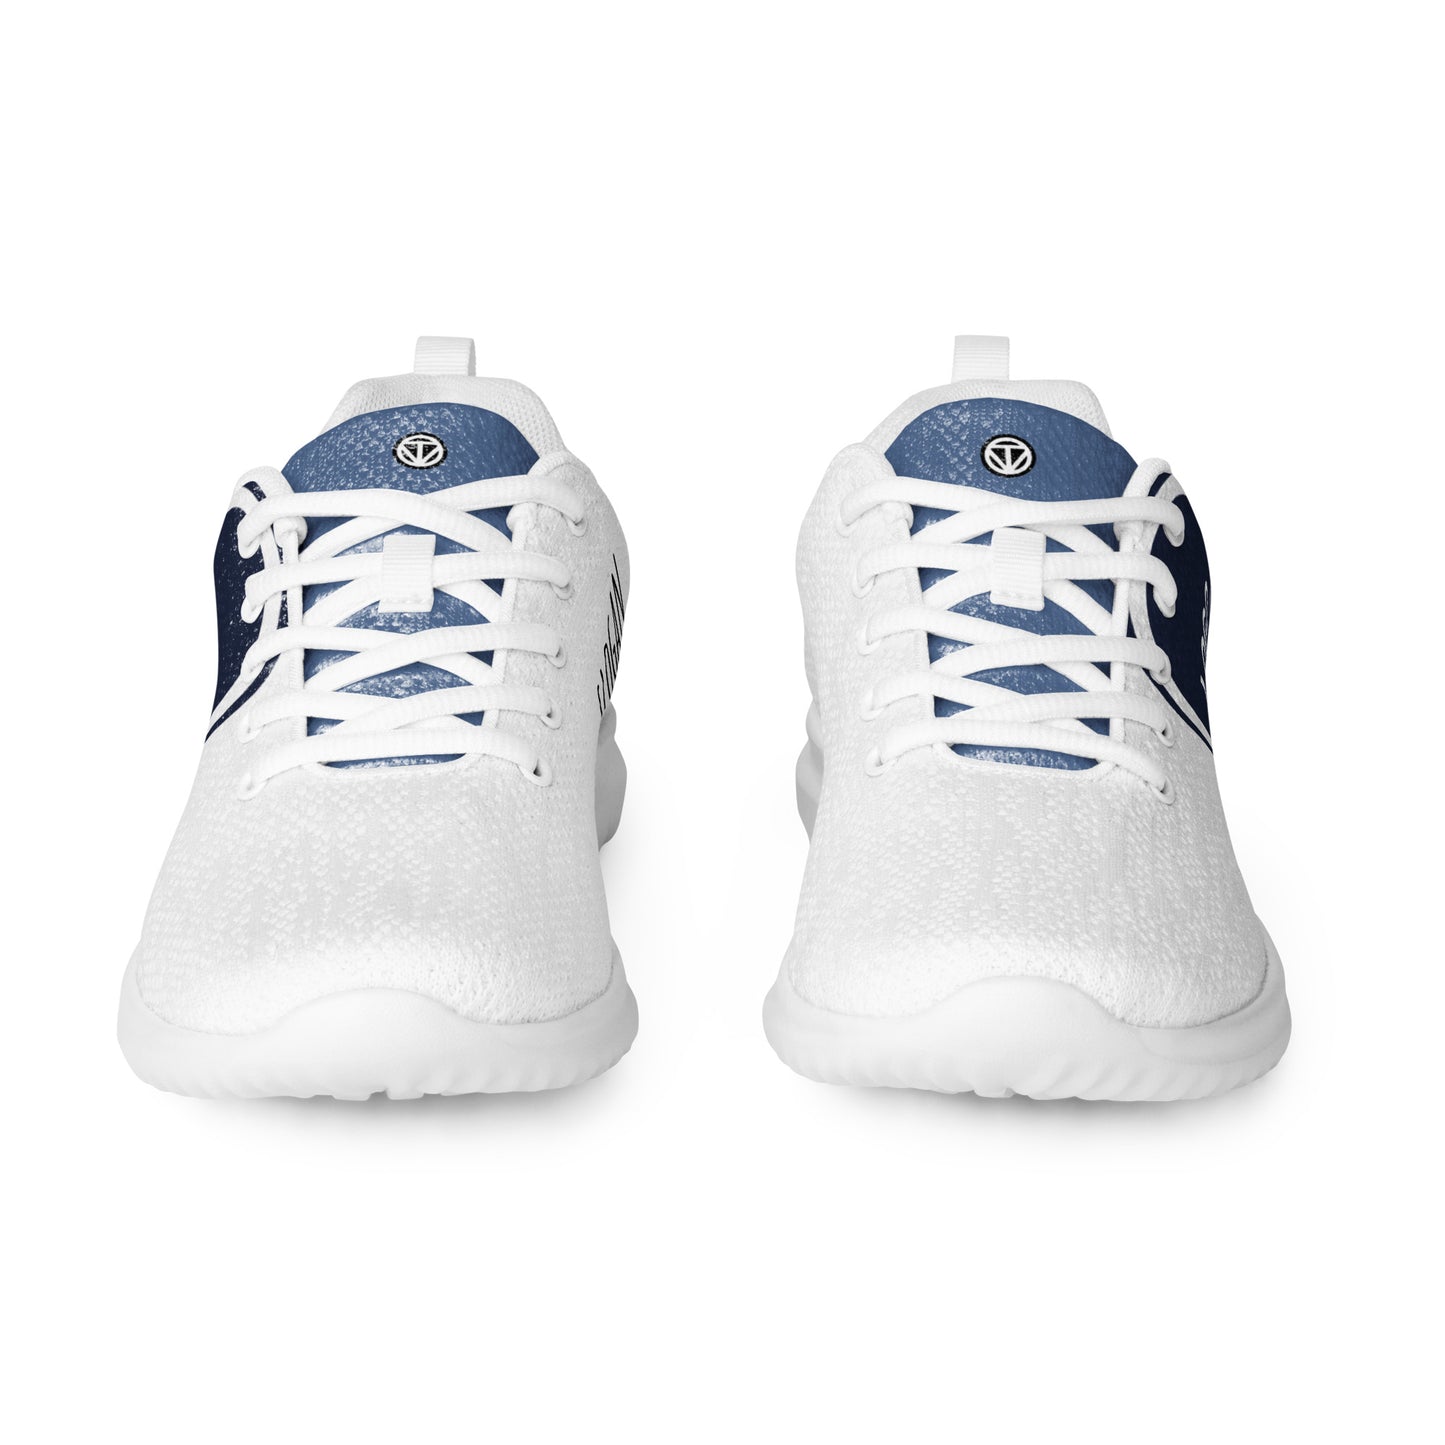 TIME OF VIBES - Men’s athletic shoes CORPORATE - €89.00